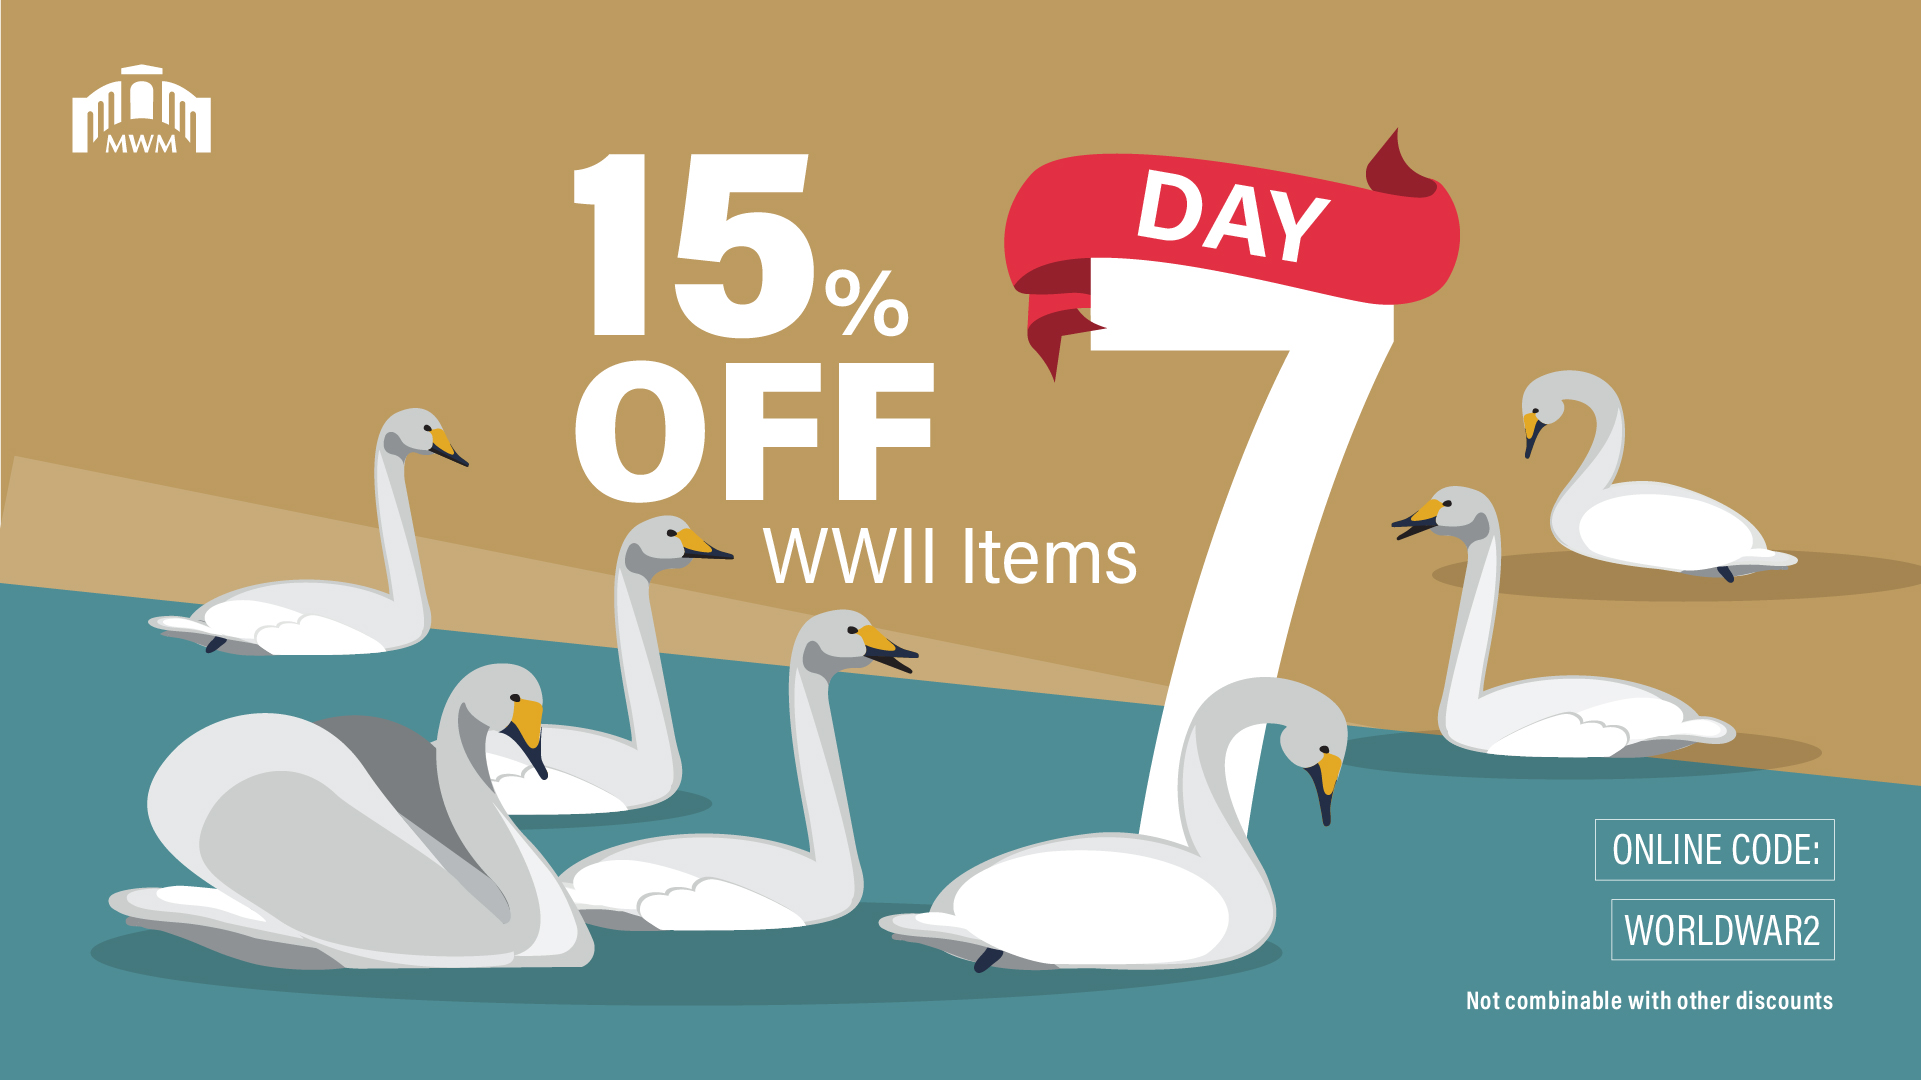 The Twelve Days of Christmas. Day 7 with seven swans swimming. The words 15% off WWII items.